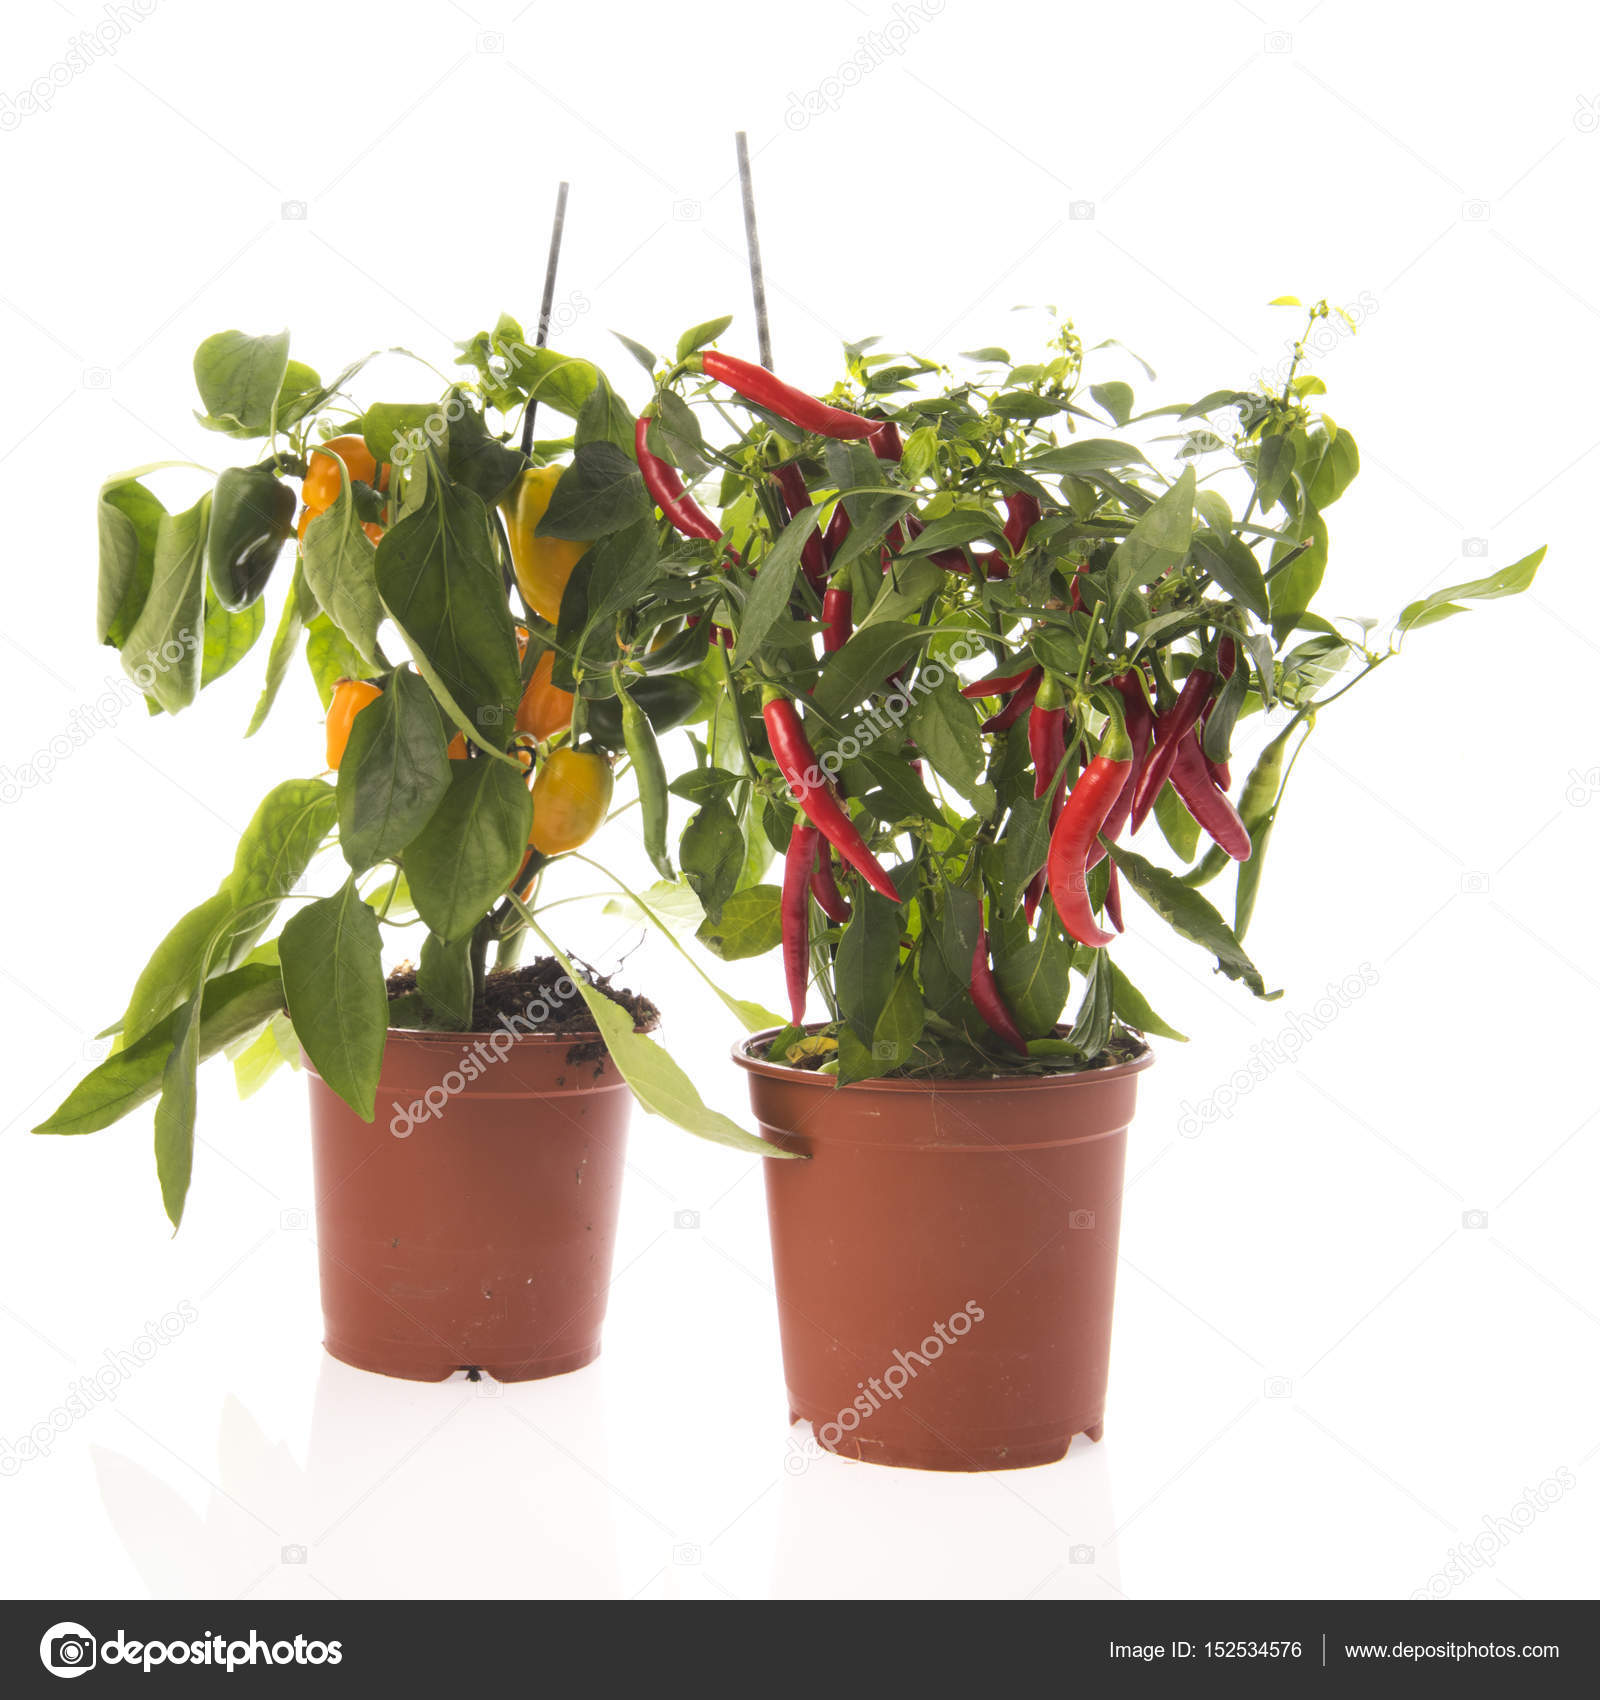 Chili pepper and paprika plant — Stock Photo © ivonnewierink #152534576